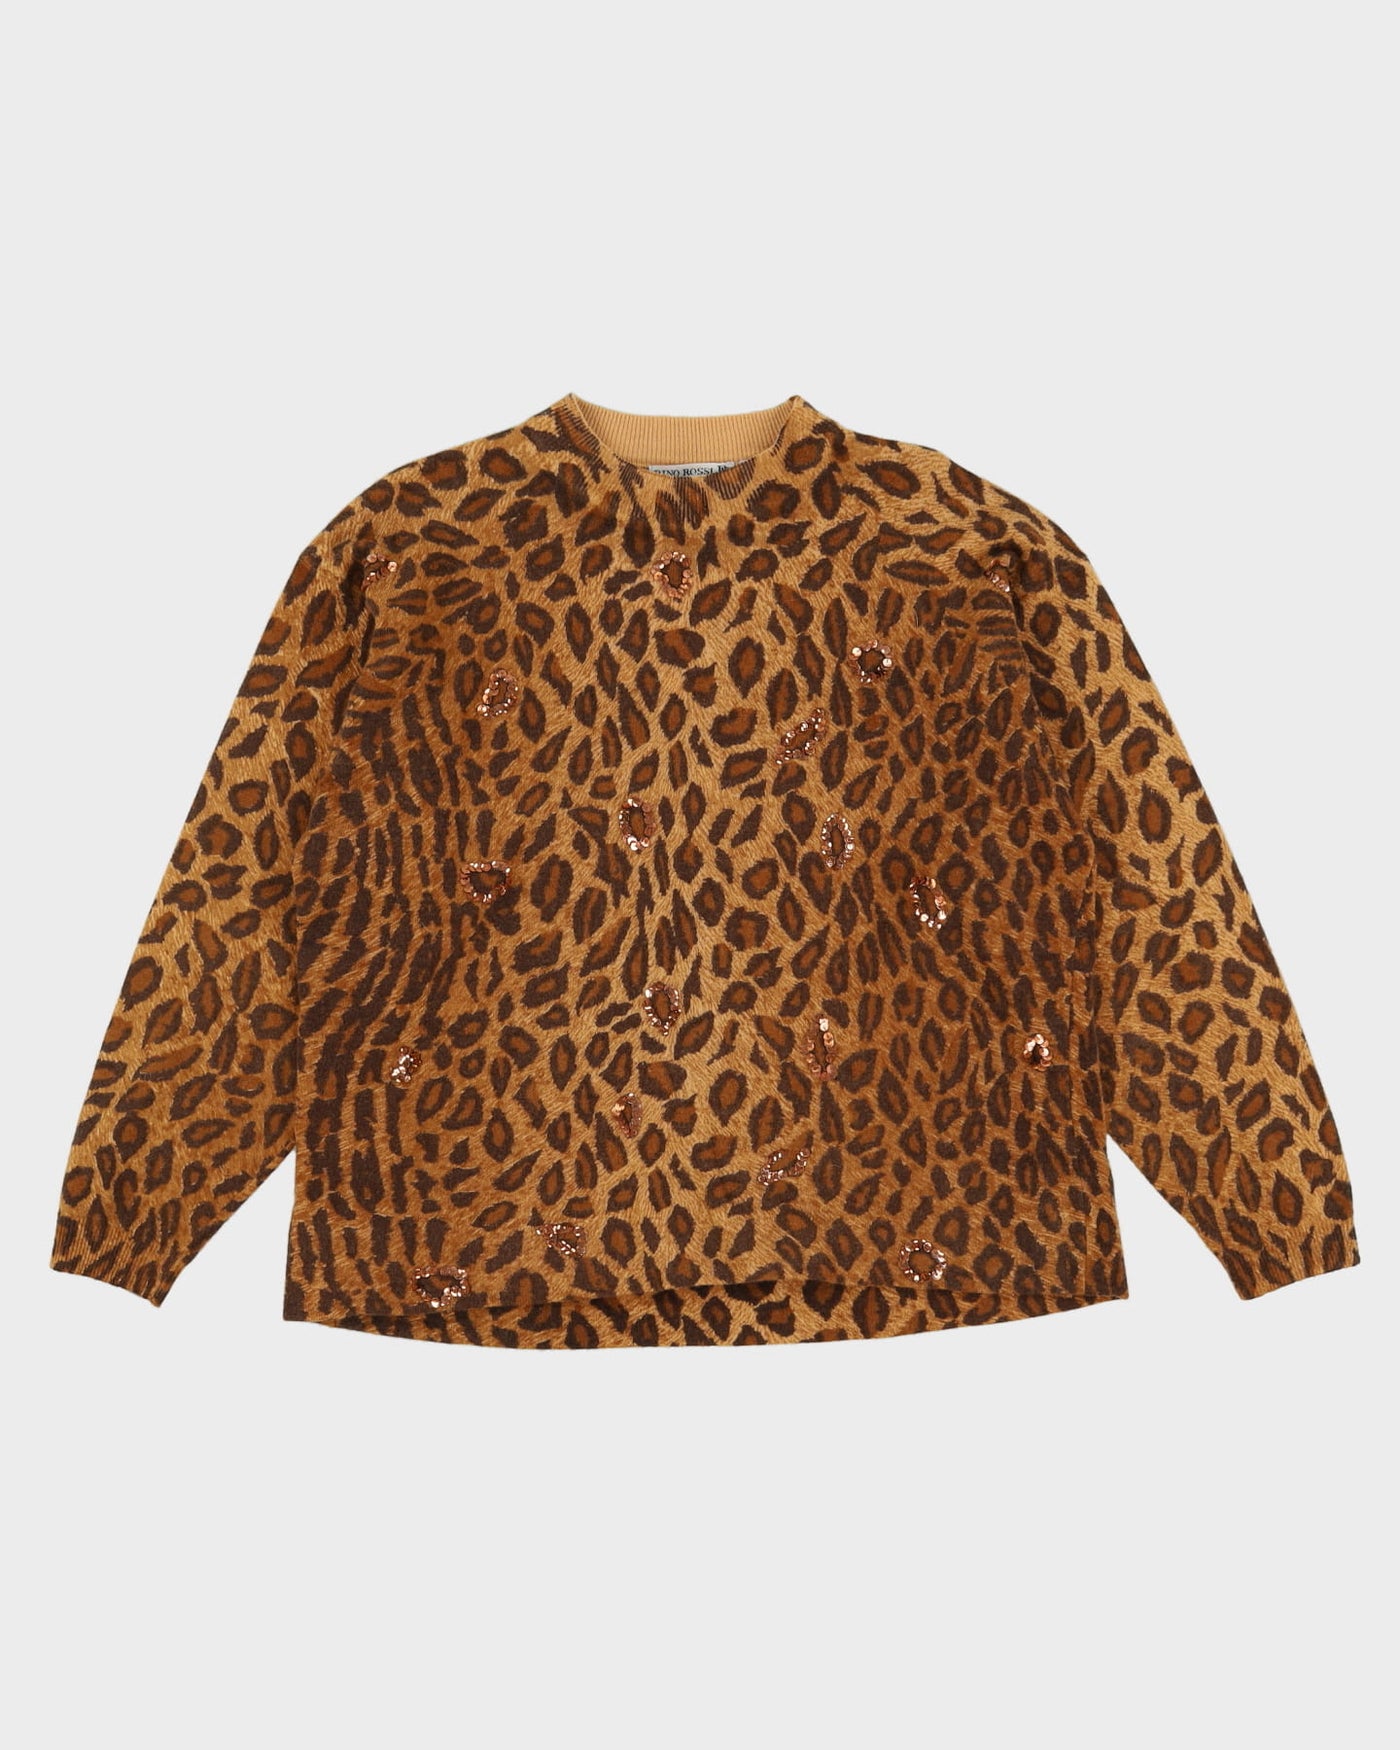 Leopard Print Sequin Detailed Knitted Jumper - M / L